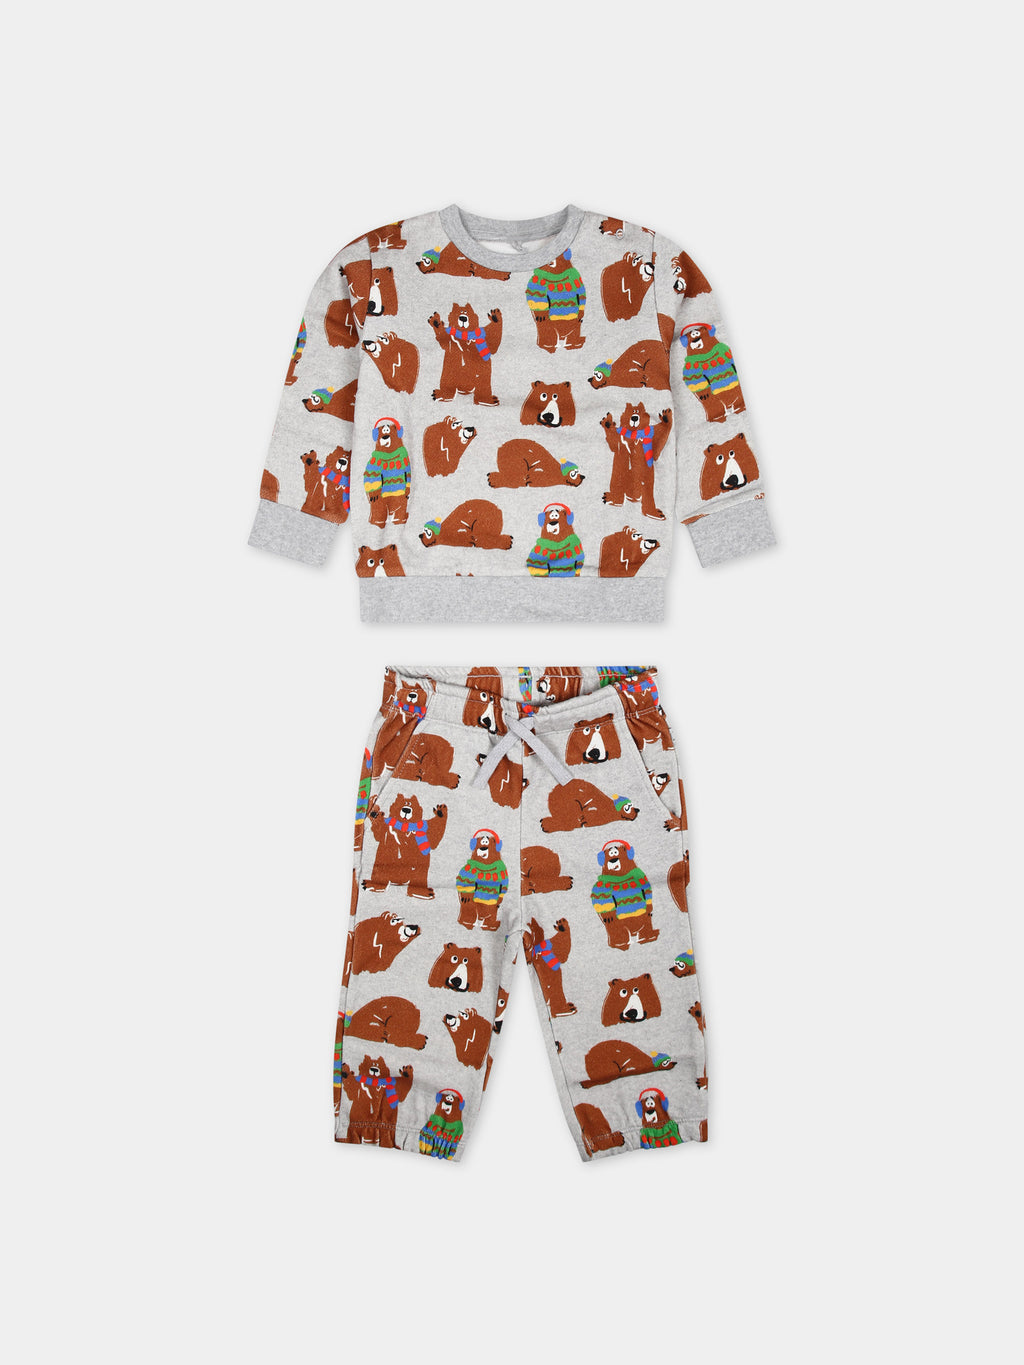 Gray set for baby boy with all-over bears